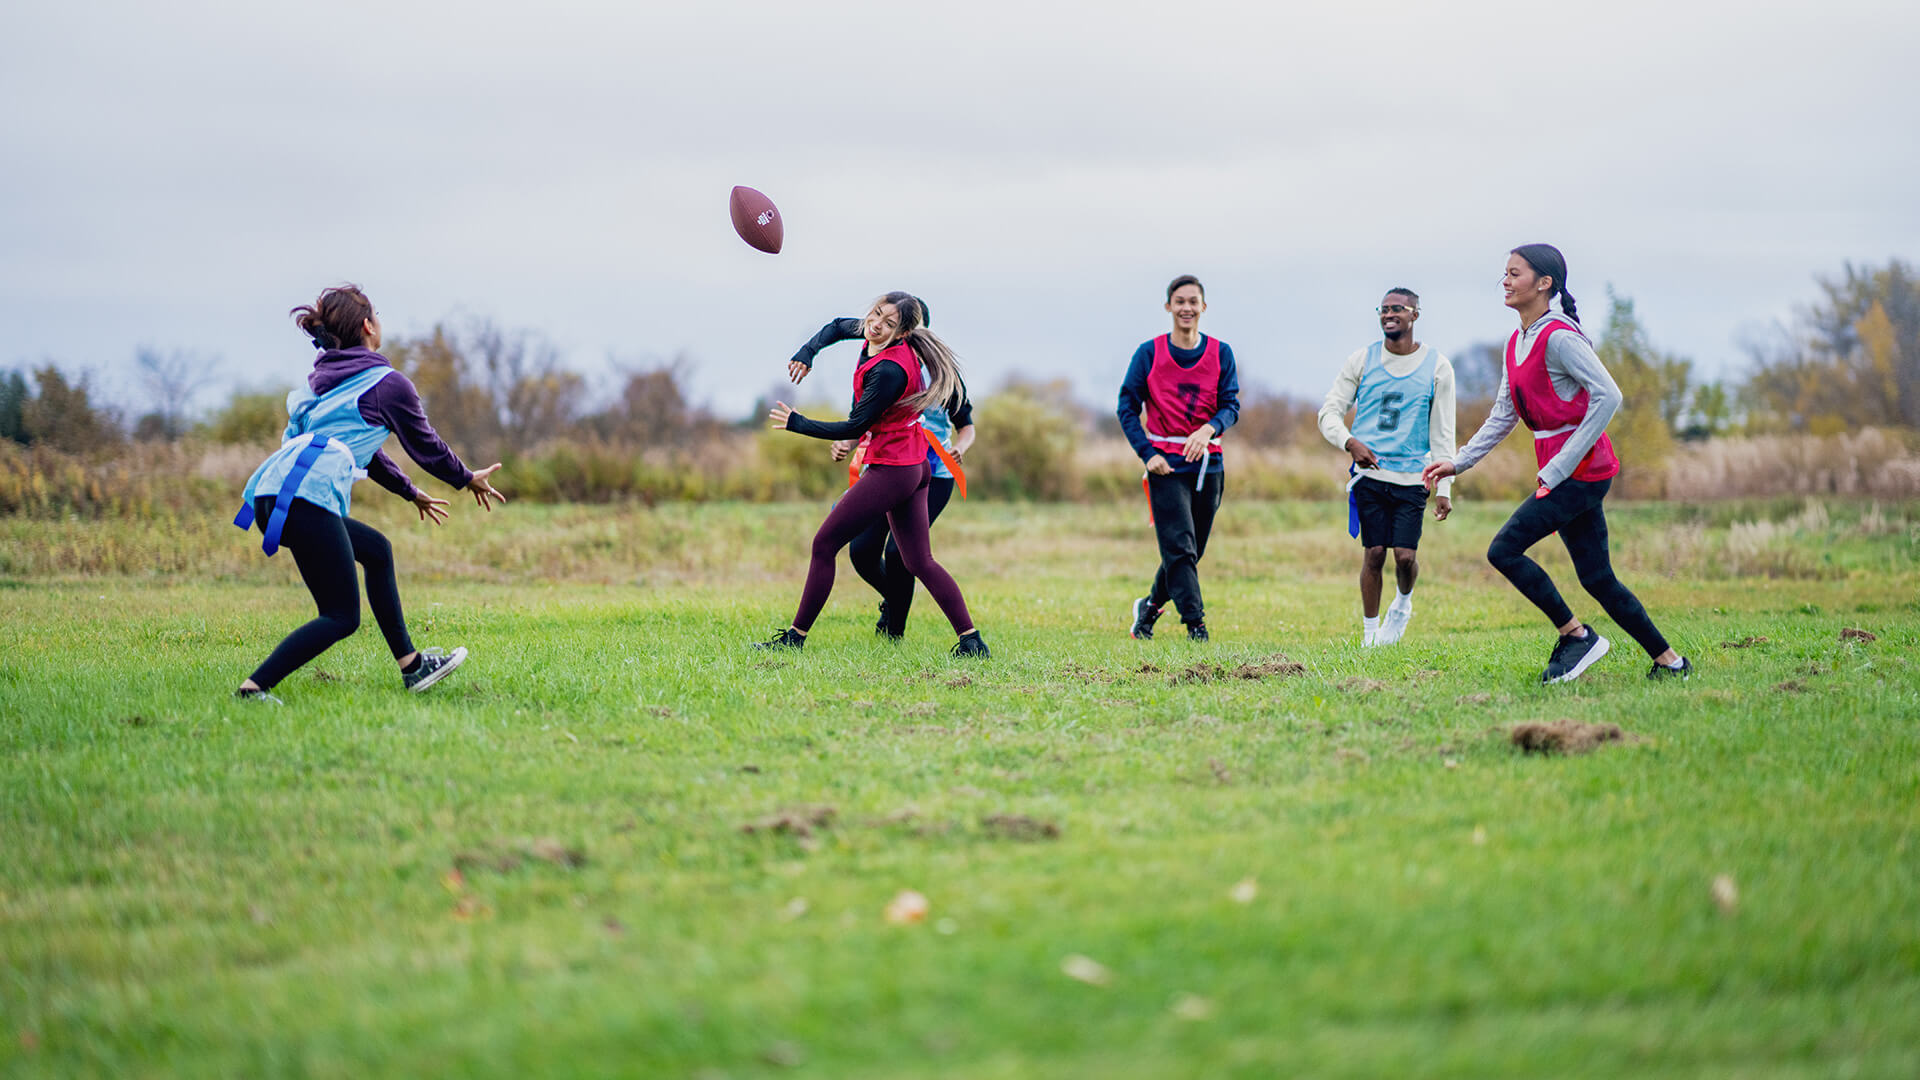 A group of University students run around on a field as they play a game of flag football together. They are each dressed comfortably and have numbered team pinnies on.